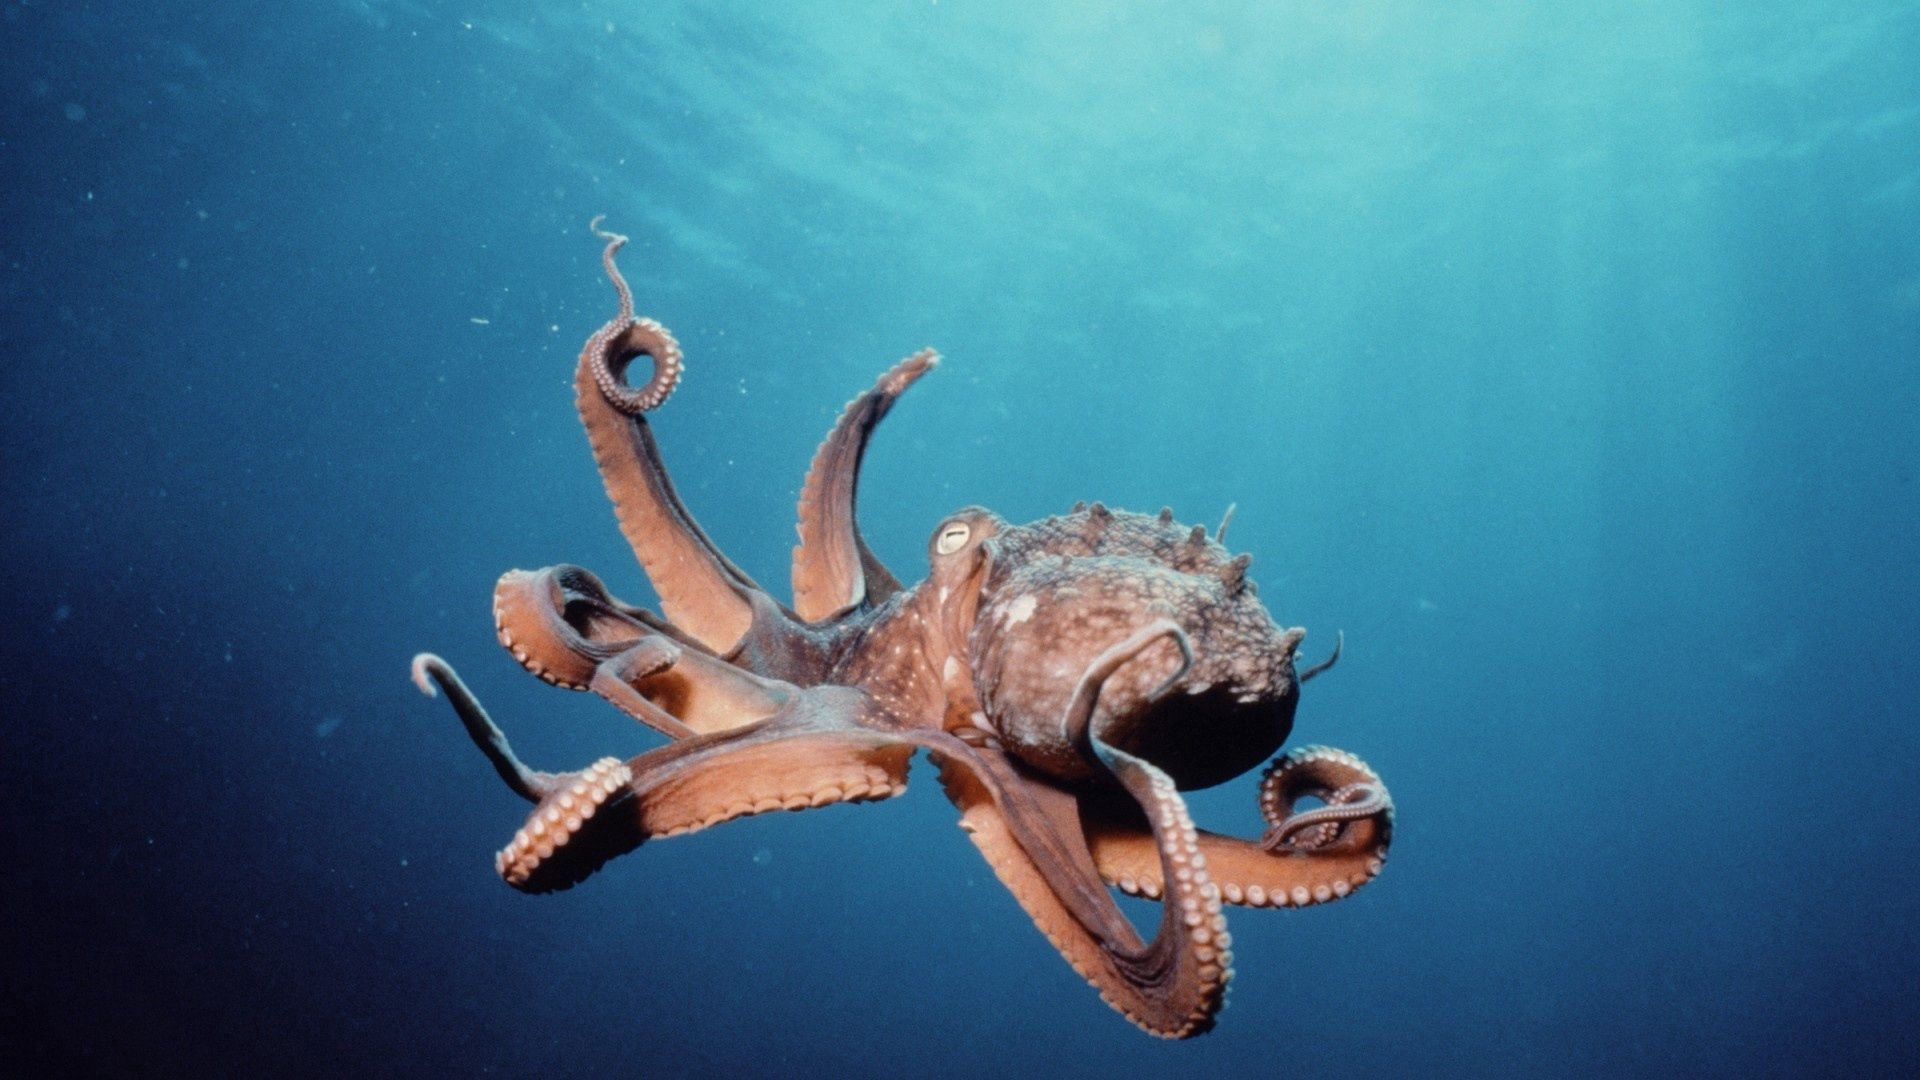 119483 Screensavers and Wallpapers Octopus for phone. Download animals, octopus, tentacles, sucker pictures for free